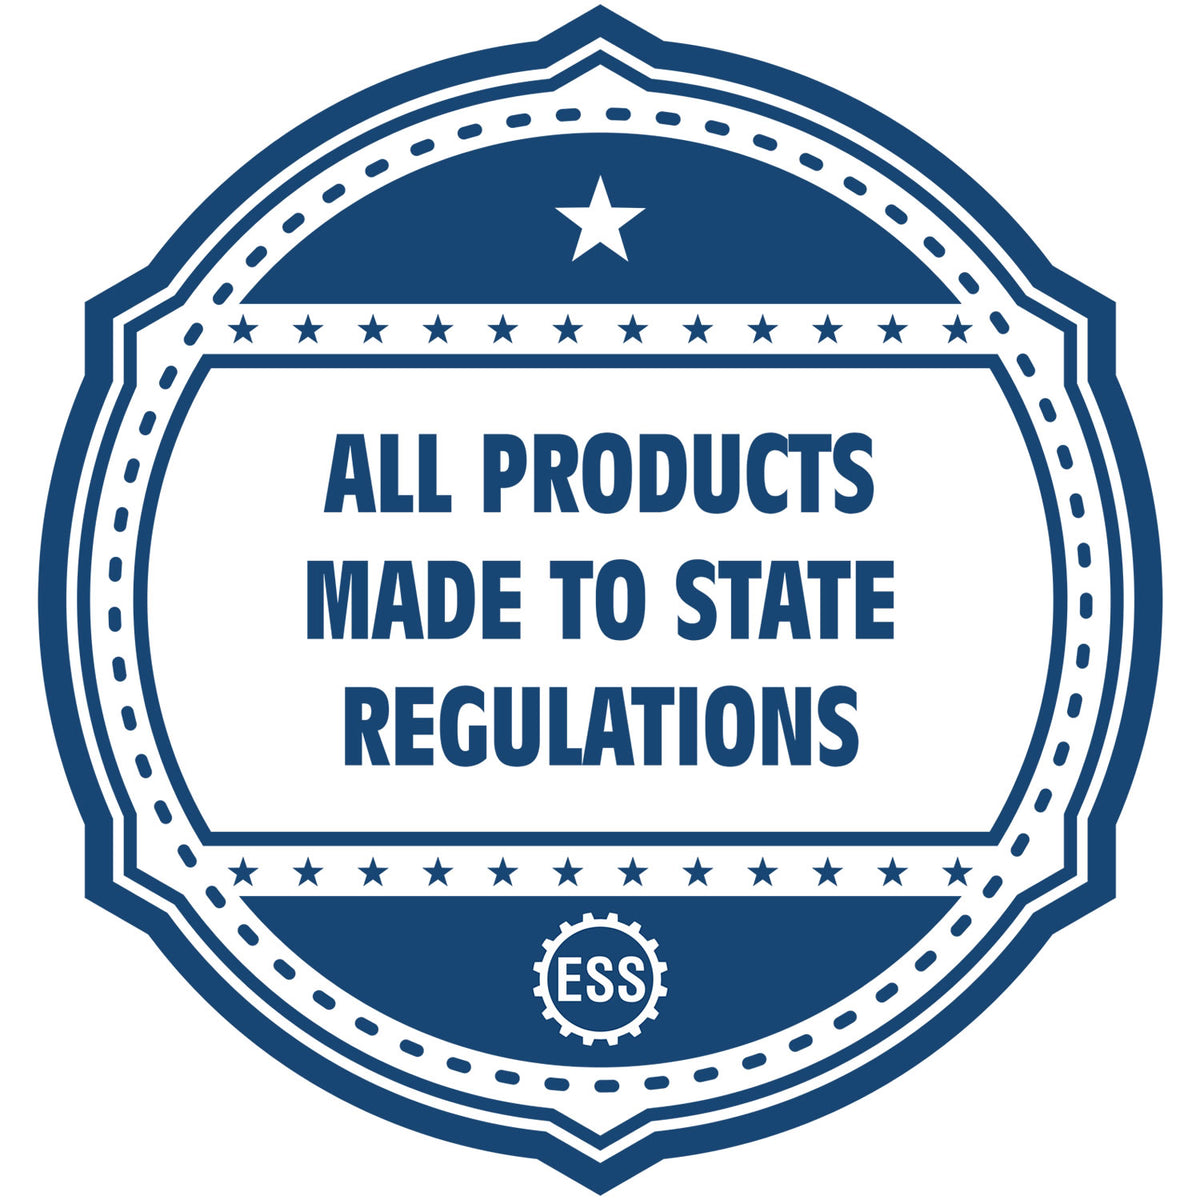 An icon or badge element for the Handheld Washington Professional Engineer Embosser showing that this product is made in compliance with state regulations.